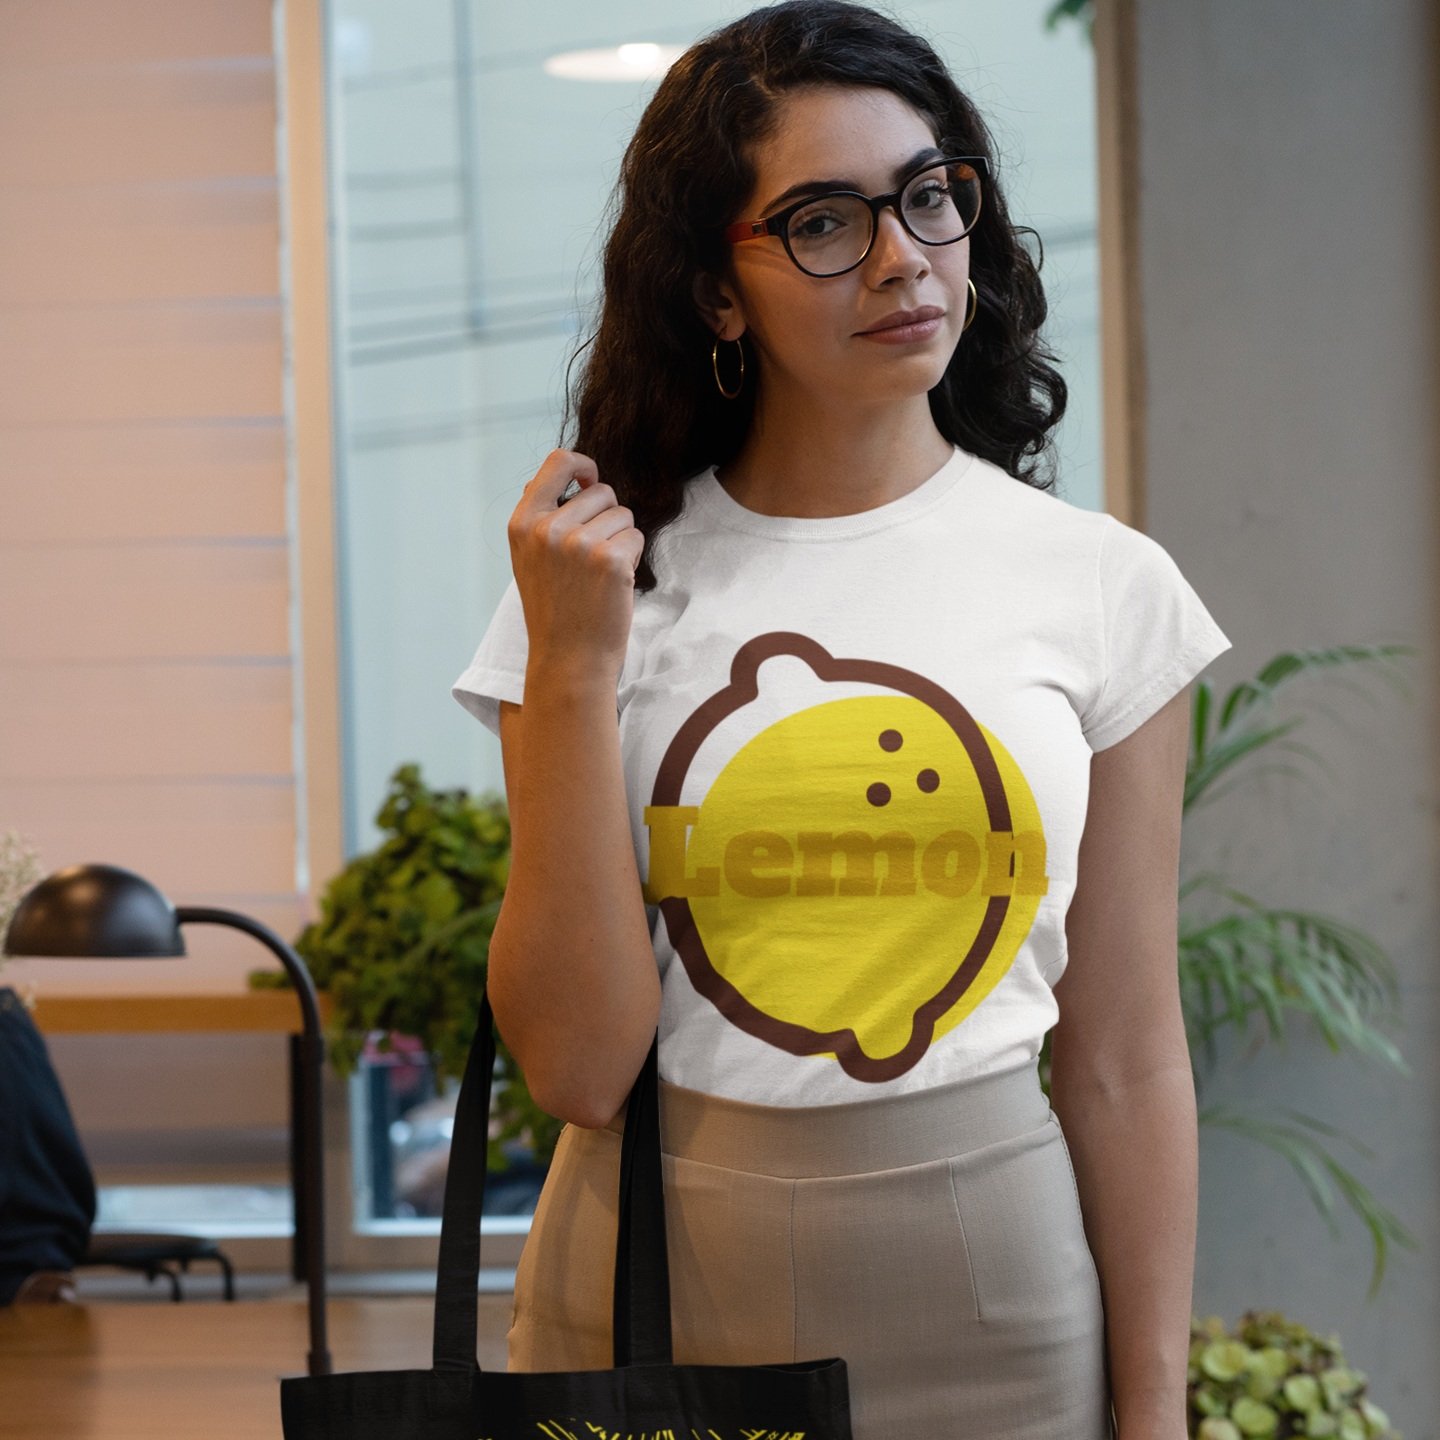 t-shirt-mockup-of-a-woman-holding-a-tote-bag-at-an-office-29413.jpg